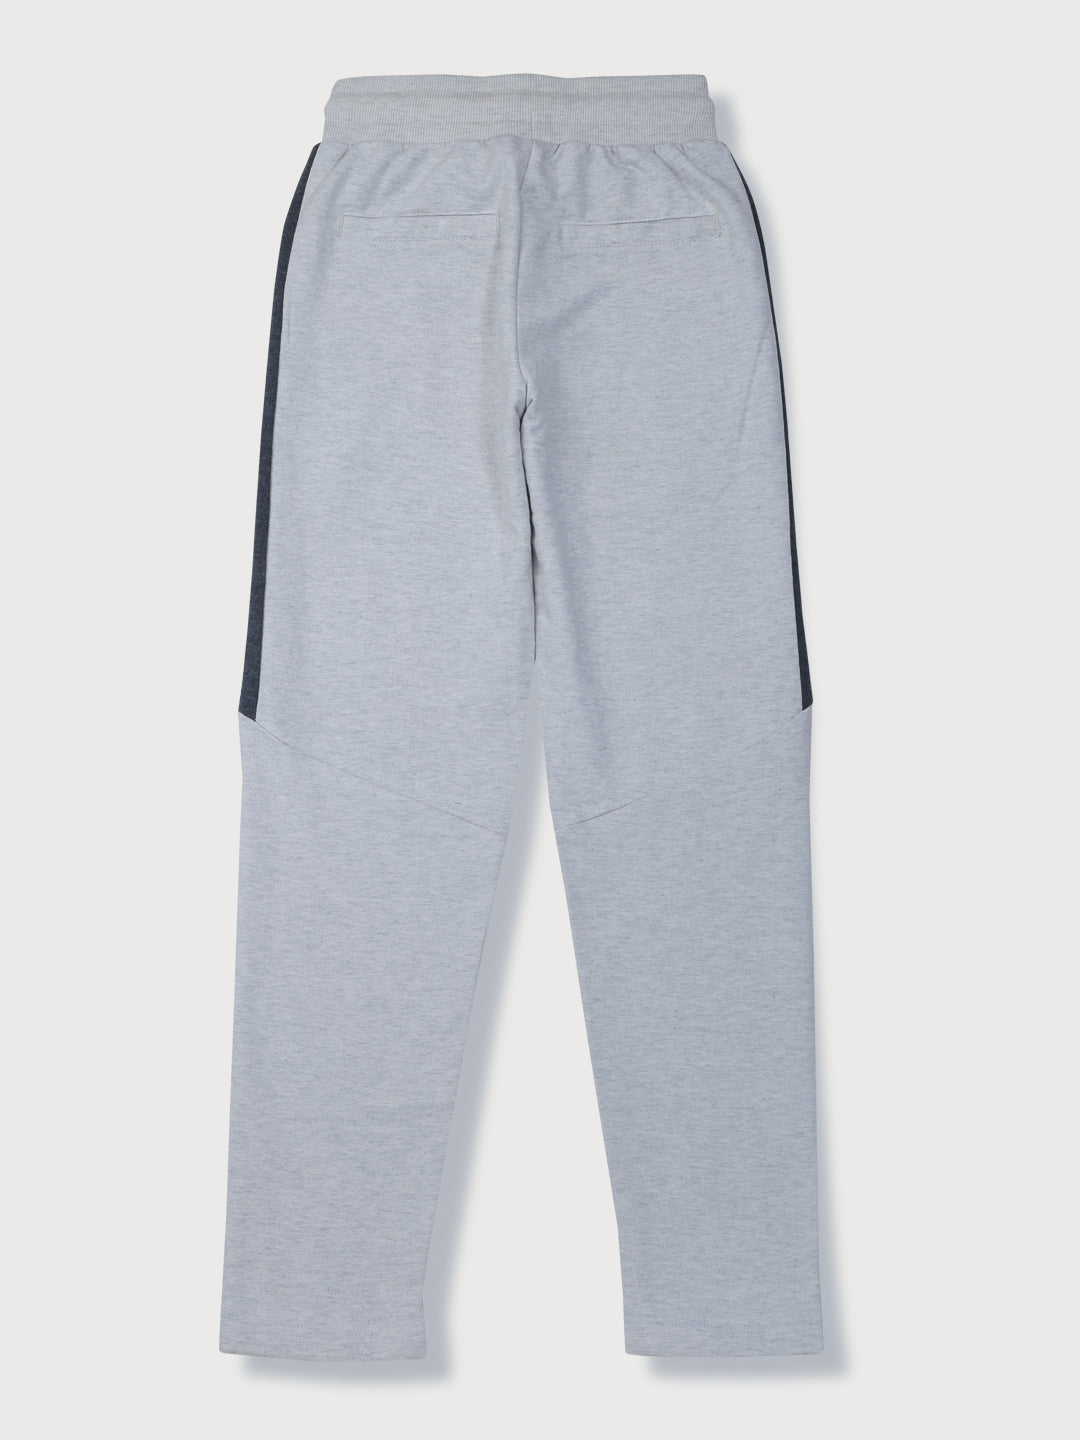 Boys Grey Solid Cotton Track Pant